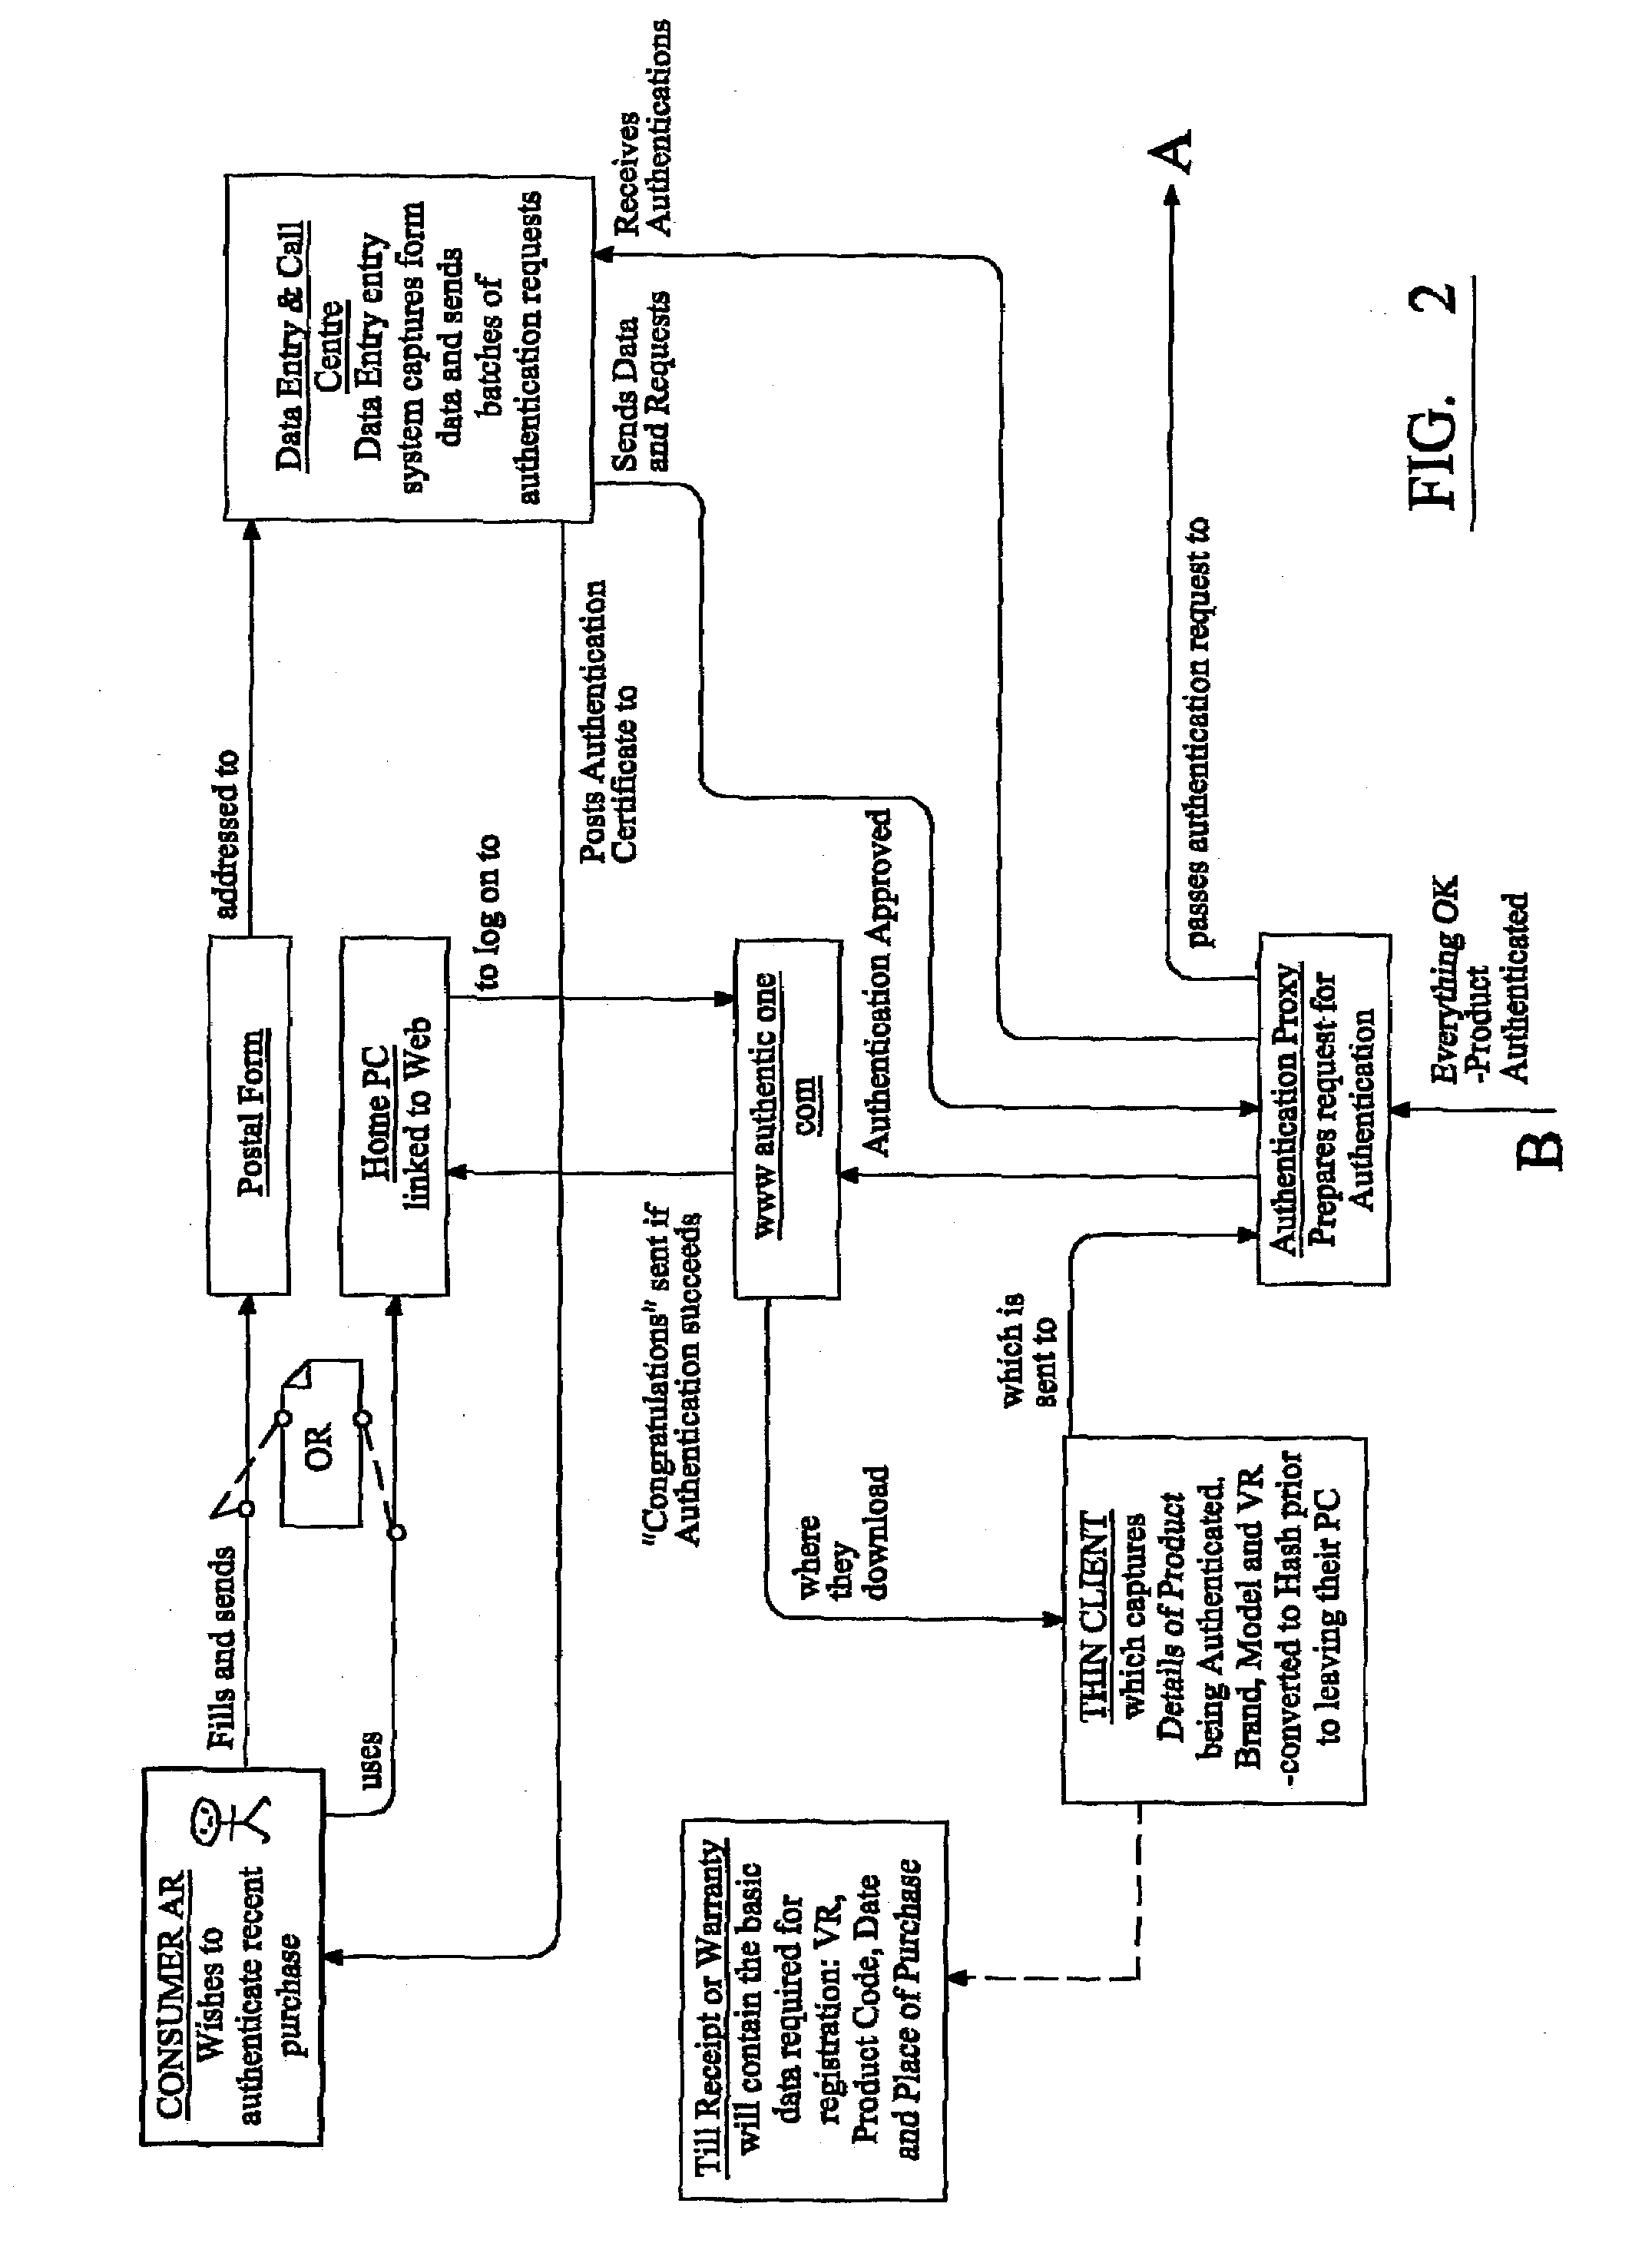 Remote authentication system